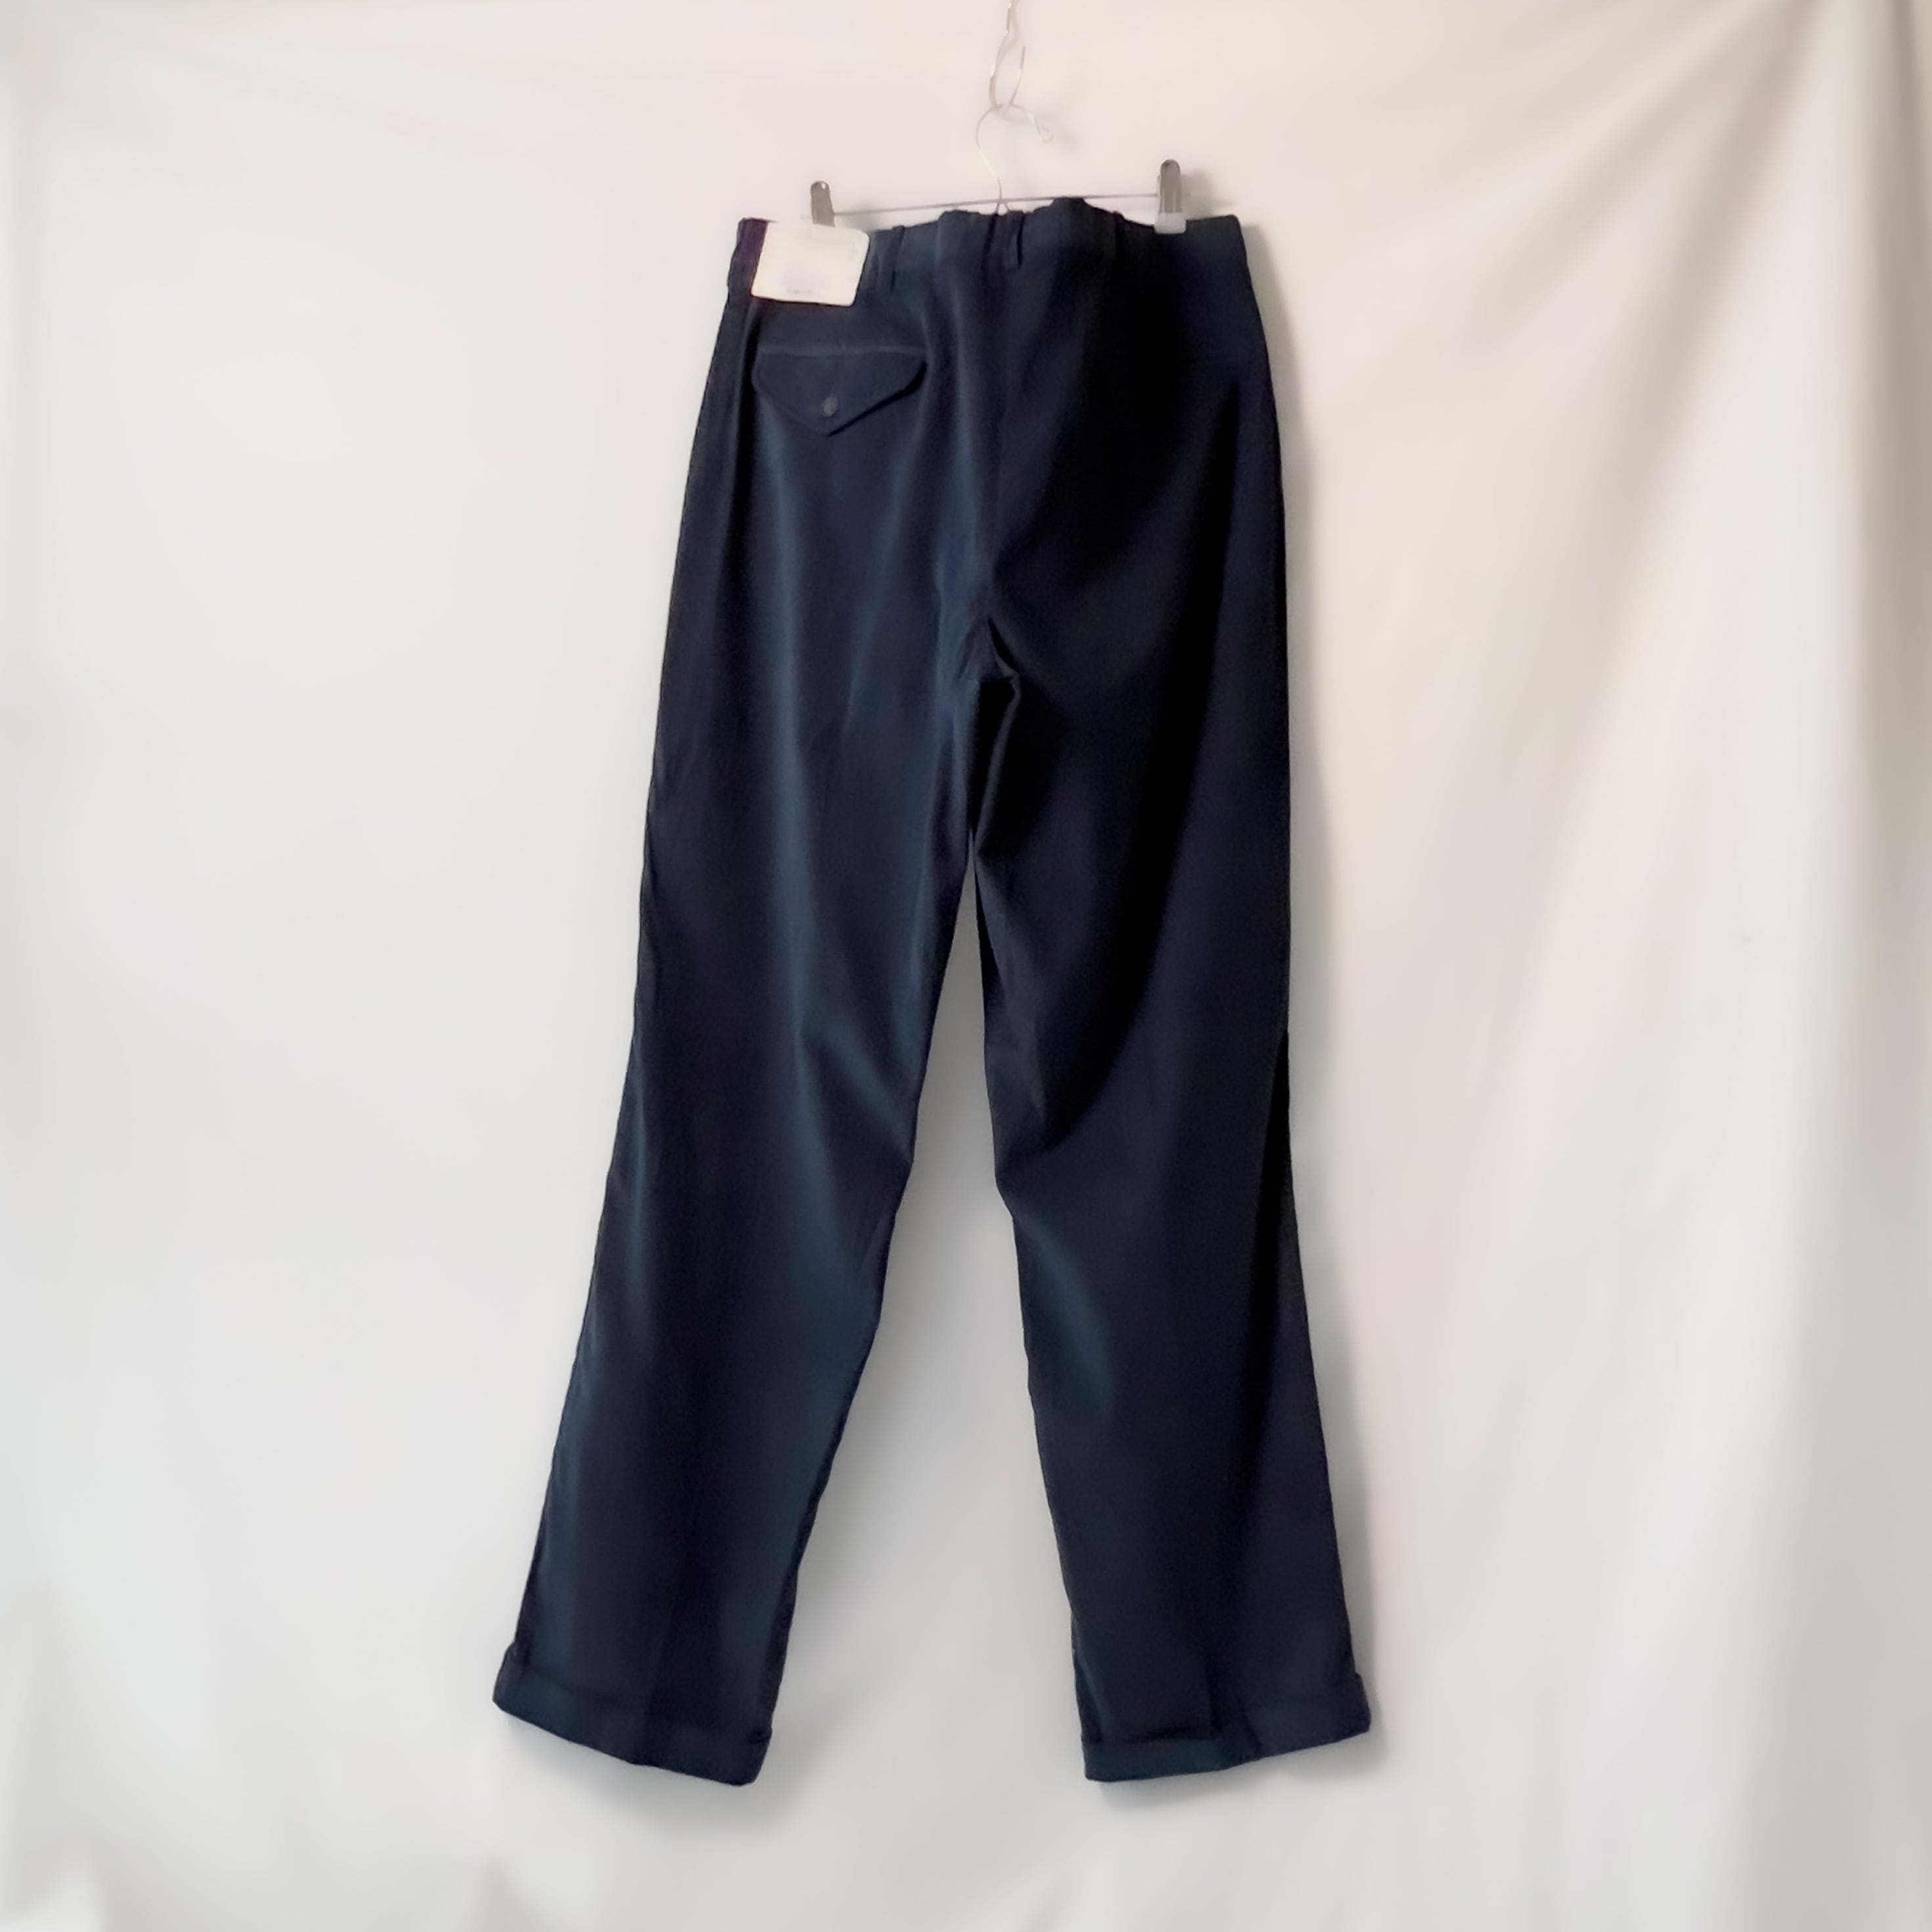 90s “Land's end” dead stock made in usa dark navy corduroy pants ...